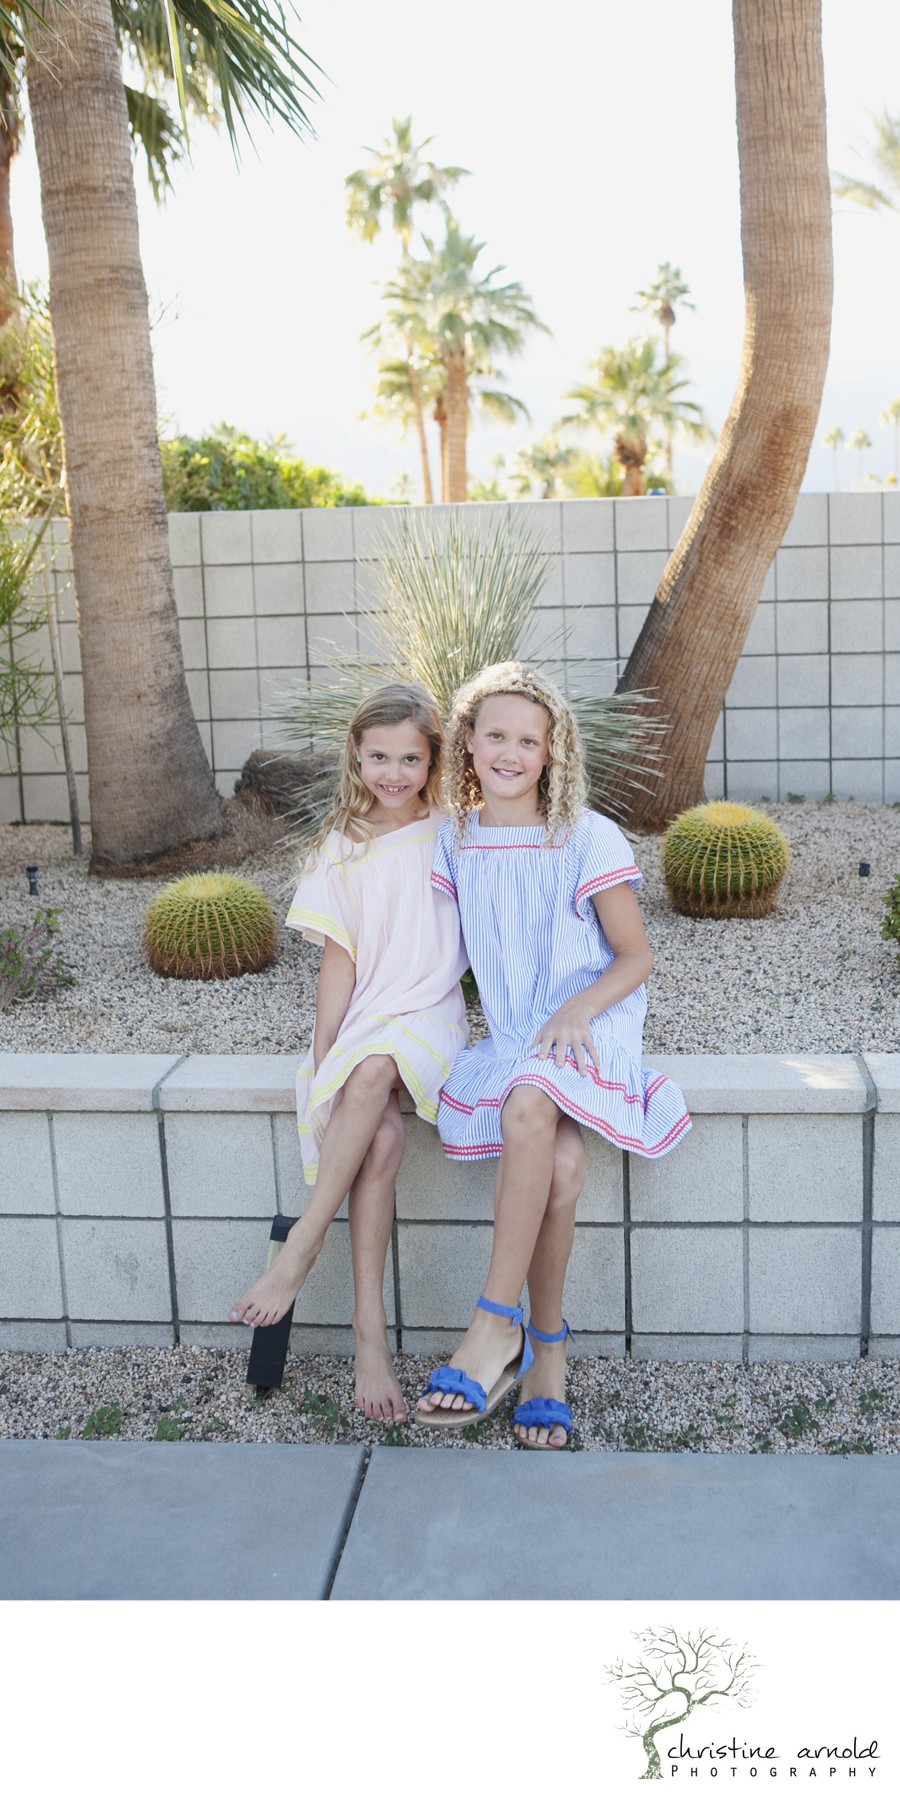 Stylish family photography in Palm Springs California